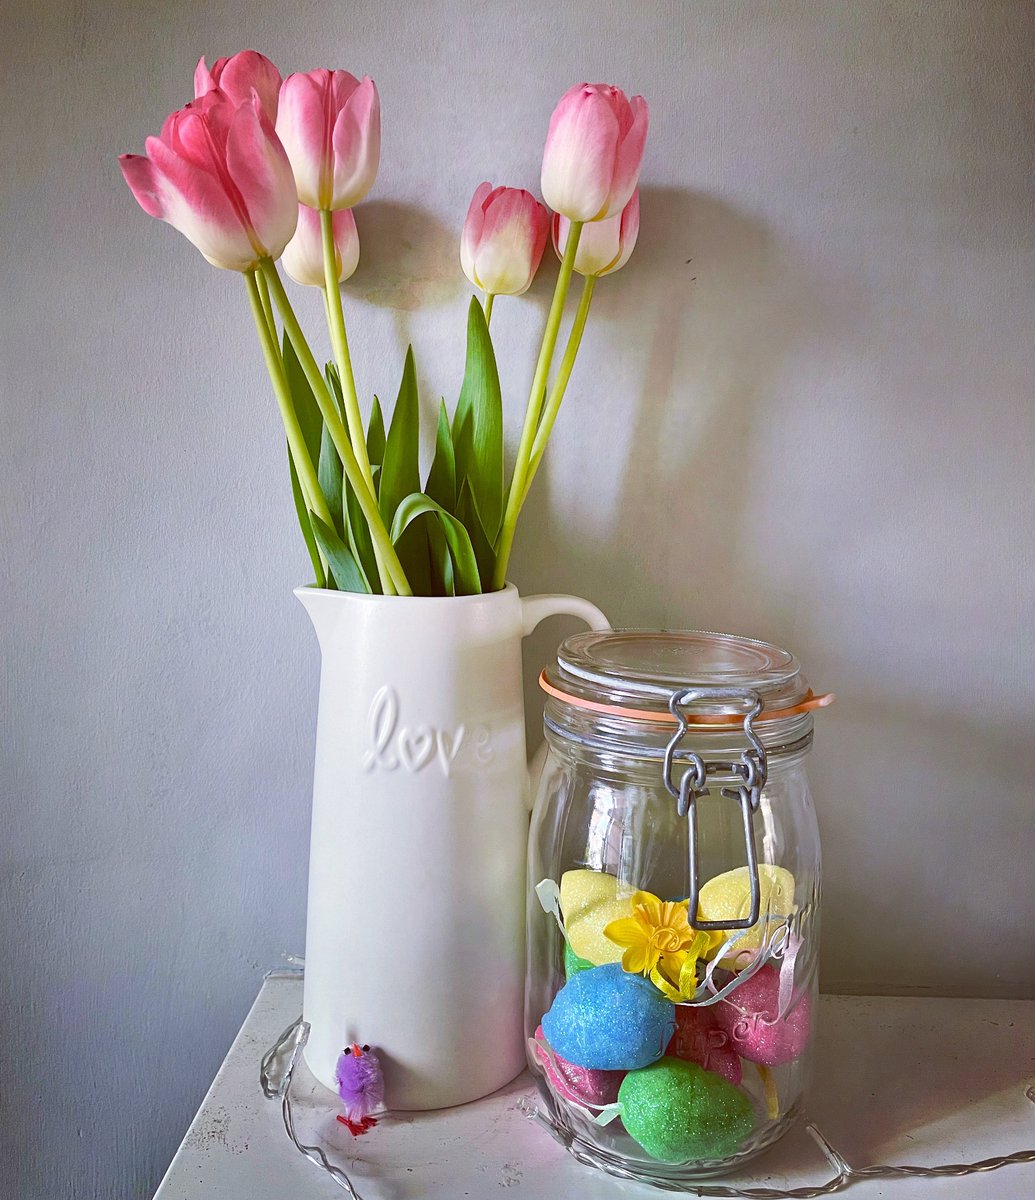 Happy Easter to all our book-loving friends, and anyone else who needs to hear it x
#easter #happyeaster #eastersunday #tulips #spring #springflowers #spring #easterdecor #masonjar #eggs #chick